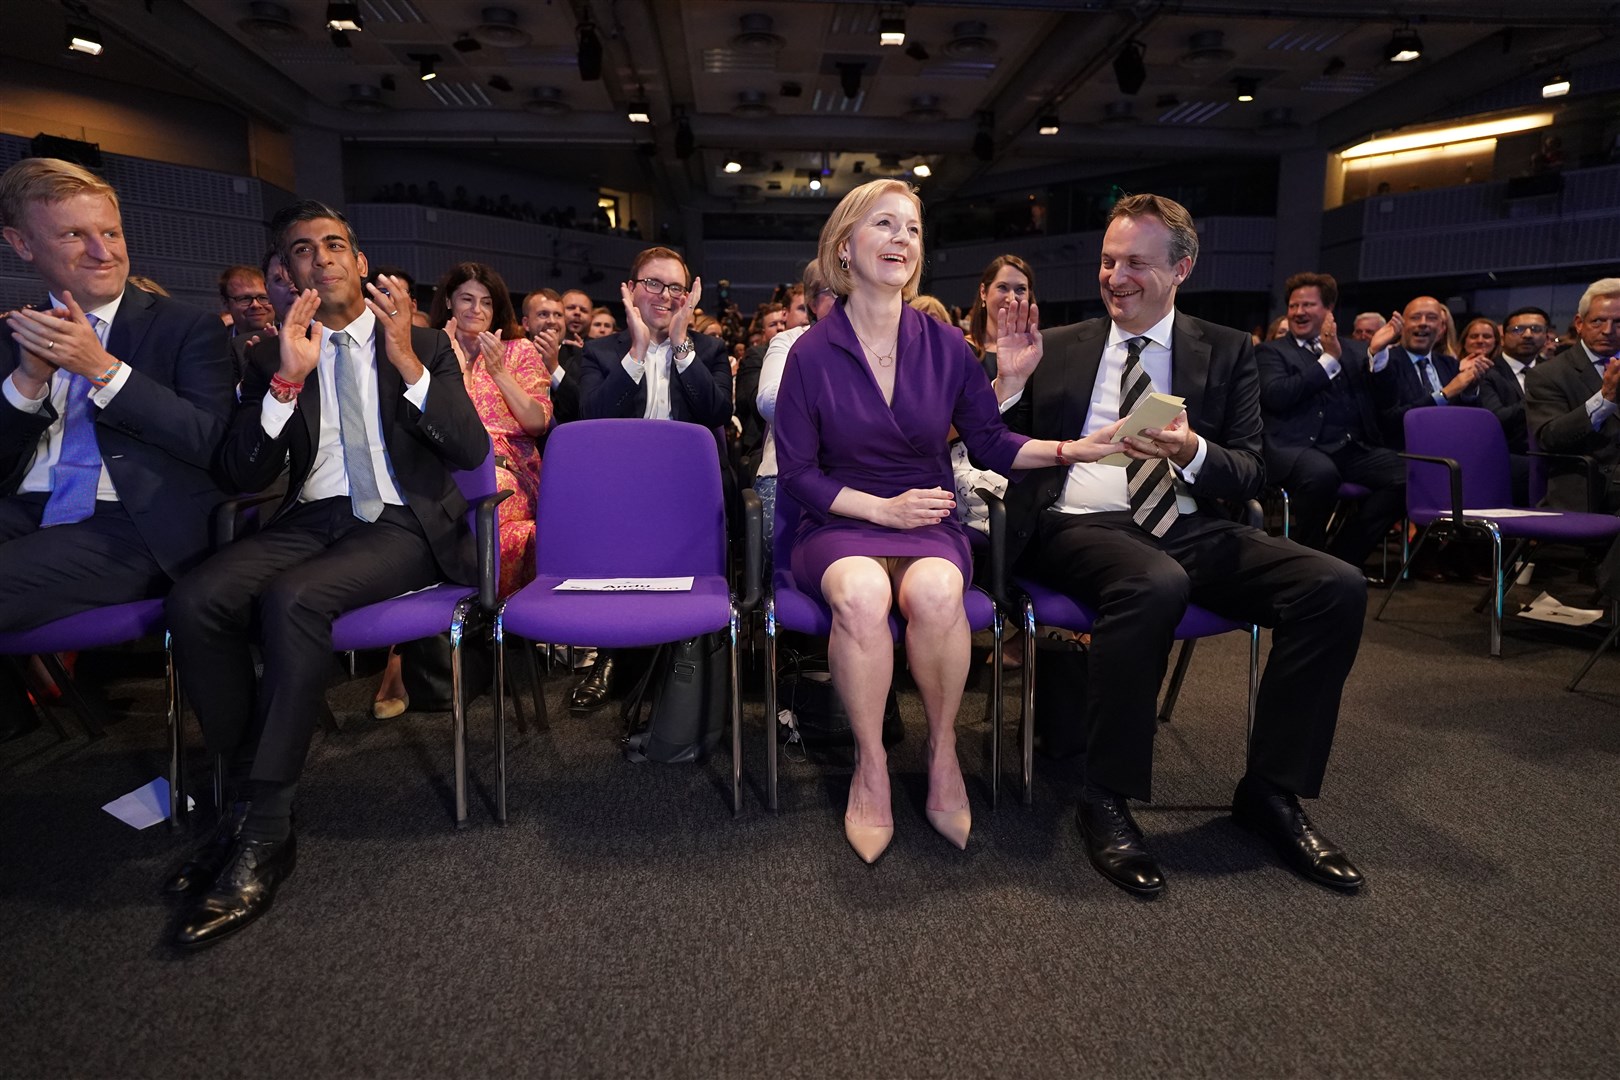 Left to right, Oliver Dowden, Rishi Sunak, Liz Truss, and her husband Hugh O’Leary, at the Queen Elizabeth II Centre in London as it was announced that Ms Truss is the new Conservative Party leader and will become the next prime minister (Stefan Rousseau/PA)